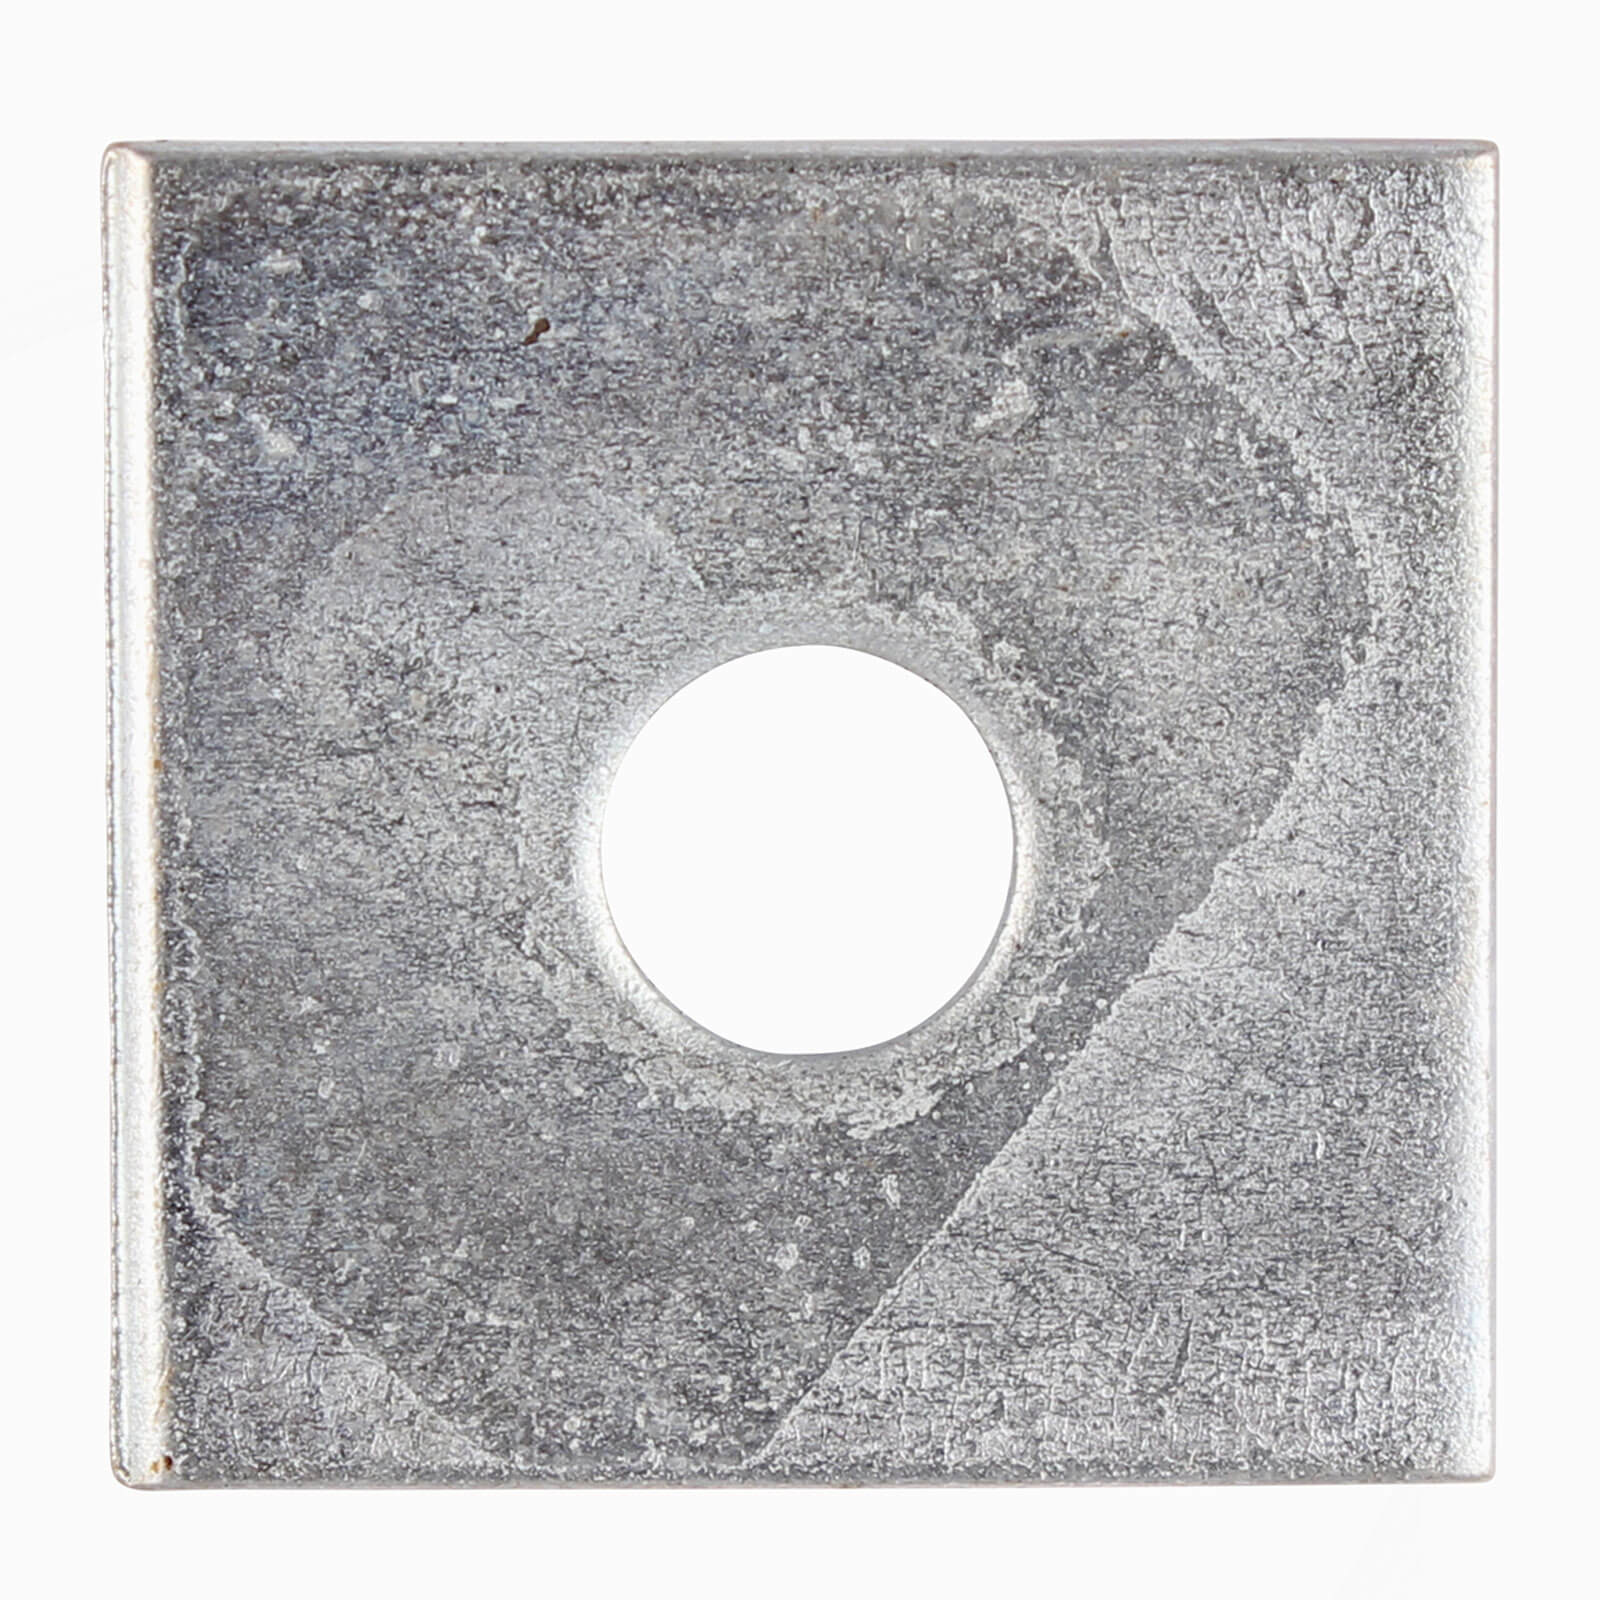 Image of Square Plate Washer Zinc Plated 16mm 50mm Pack of 100